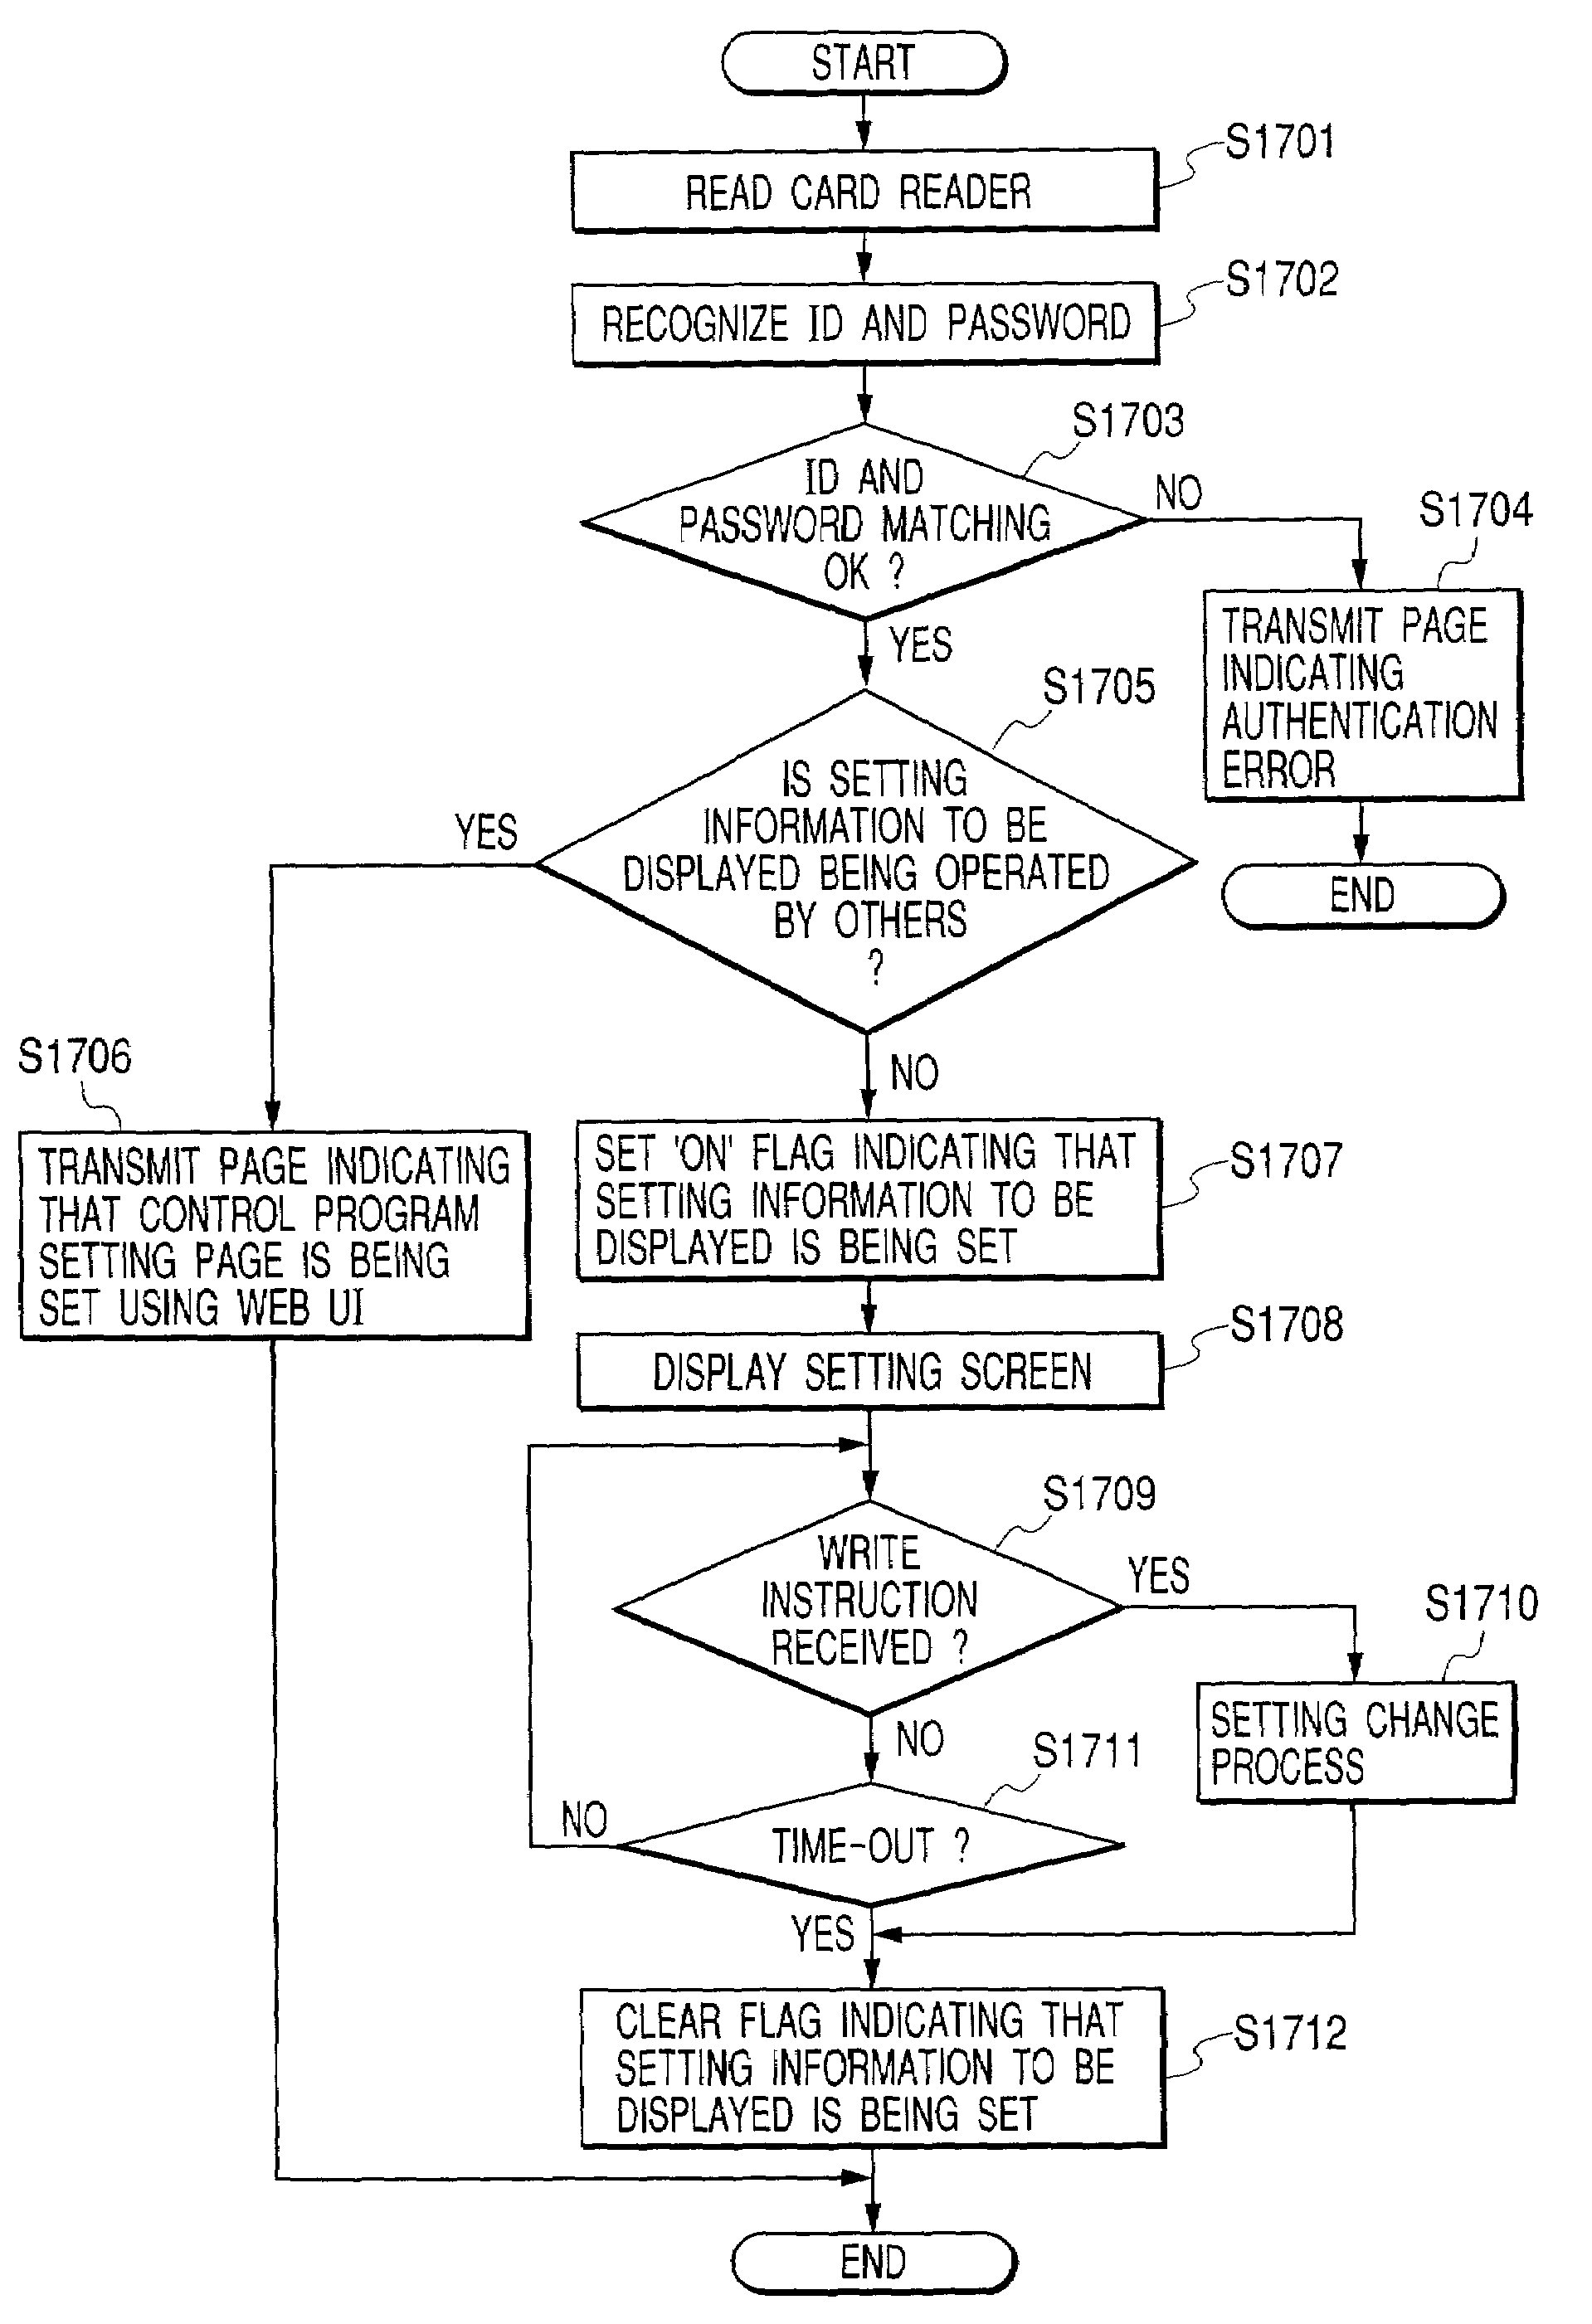 Image processing device, information processing method and computer-readable storage medium storing a control program for performing an operation based on whether a function is being set or requested to be set